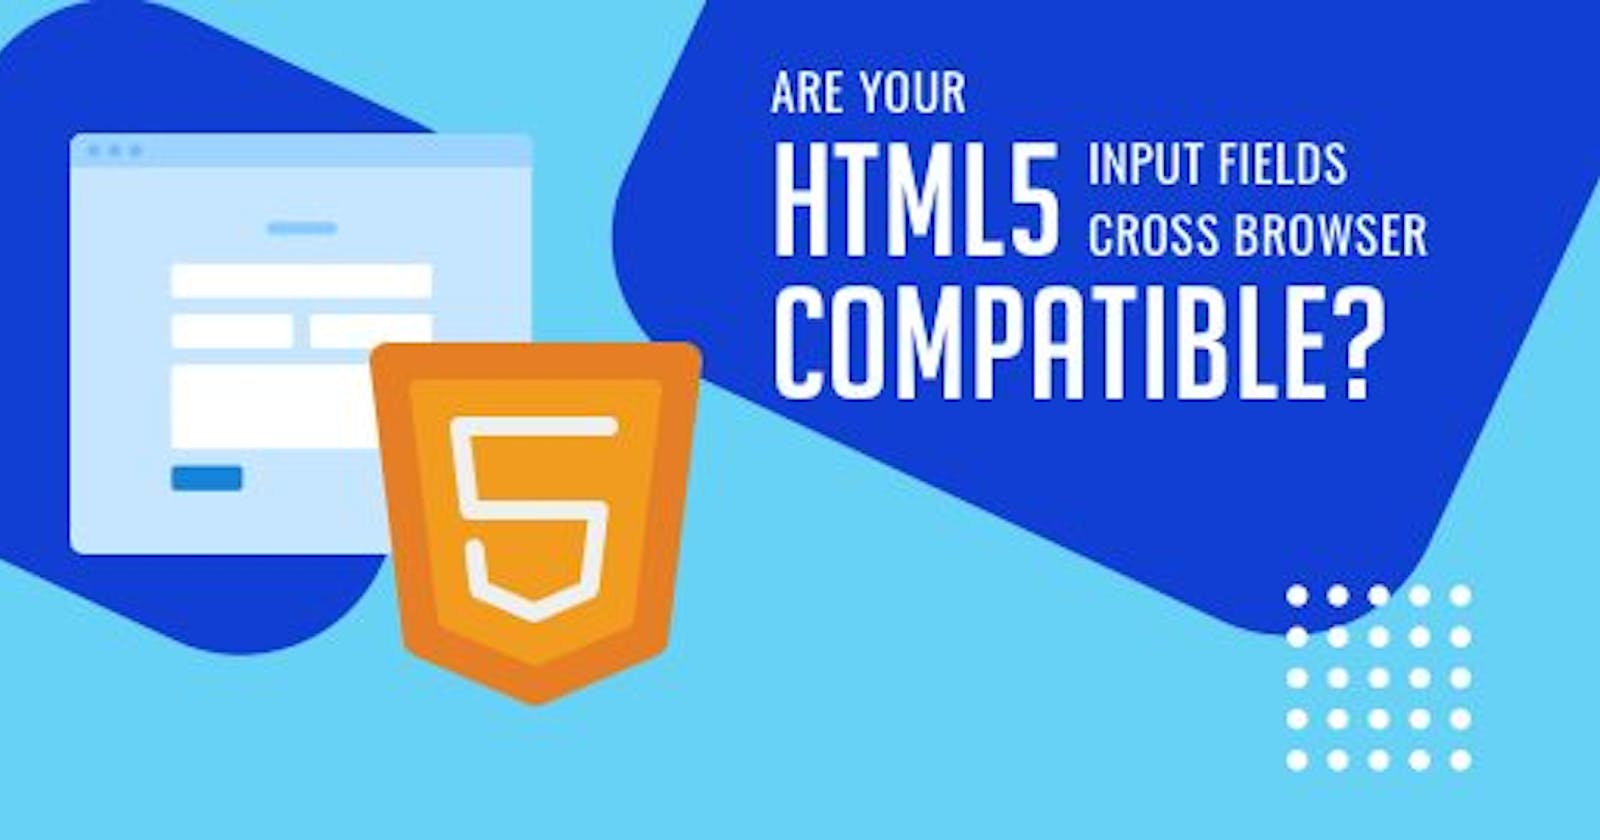 Are Your HTML5 Input Fields Cross Browser Compatible?